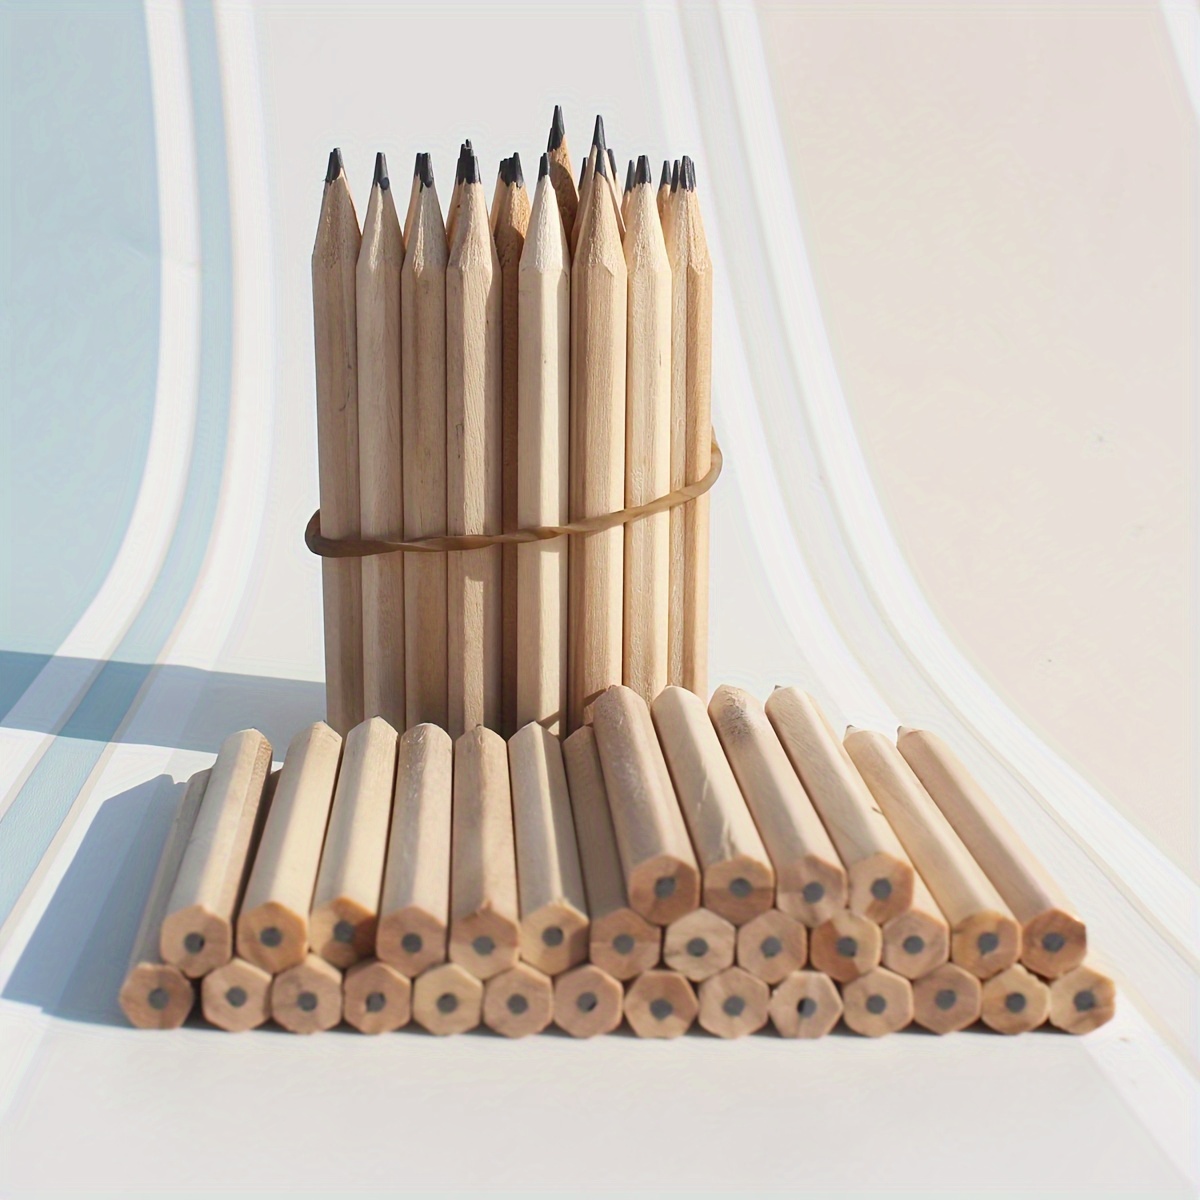 

Elegant 50-piece Hexagonal Pencil Set For Weddings, Hotels & Gifts - Perfect For Artists & Writers